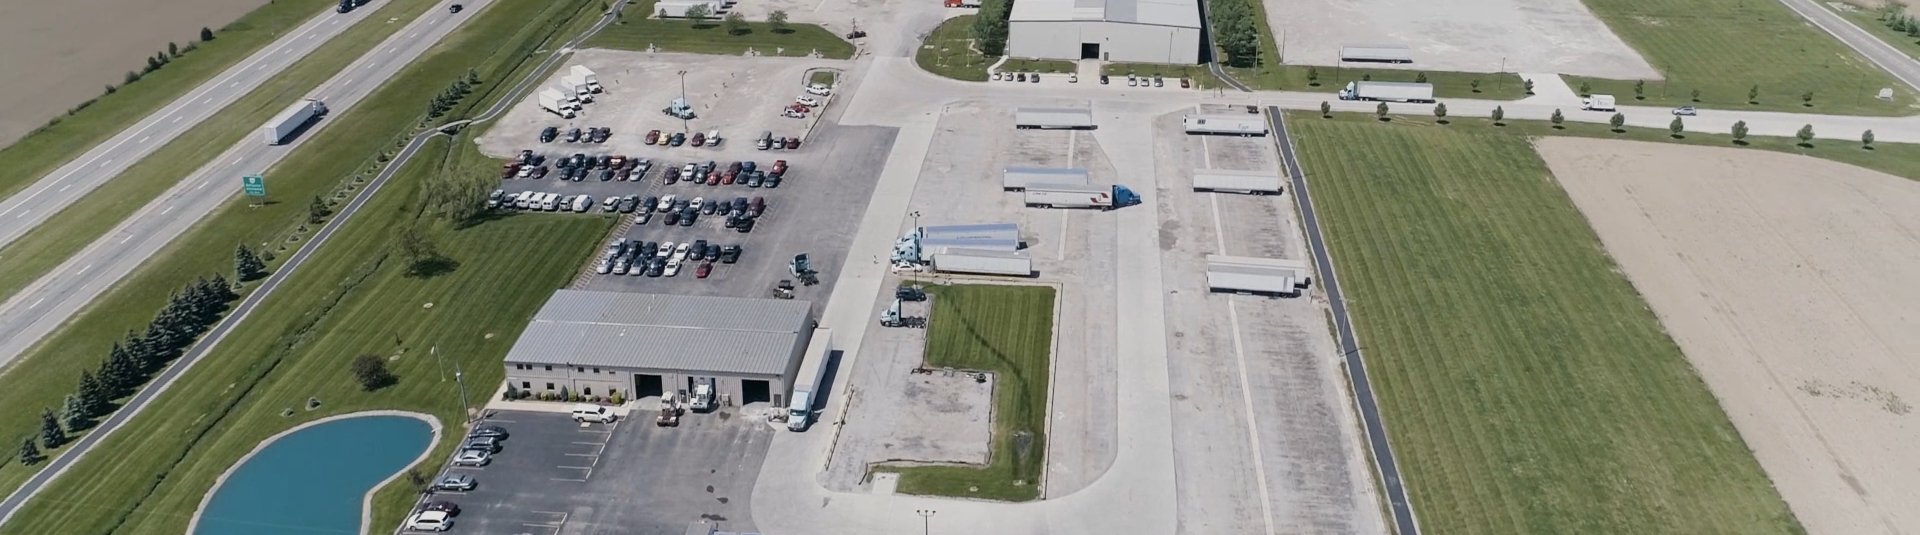 Warehouse and trucks in rural area from sky view